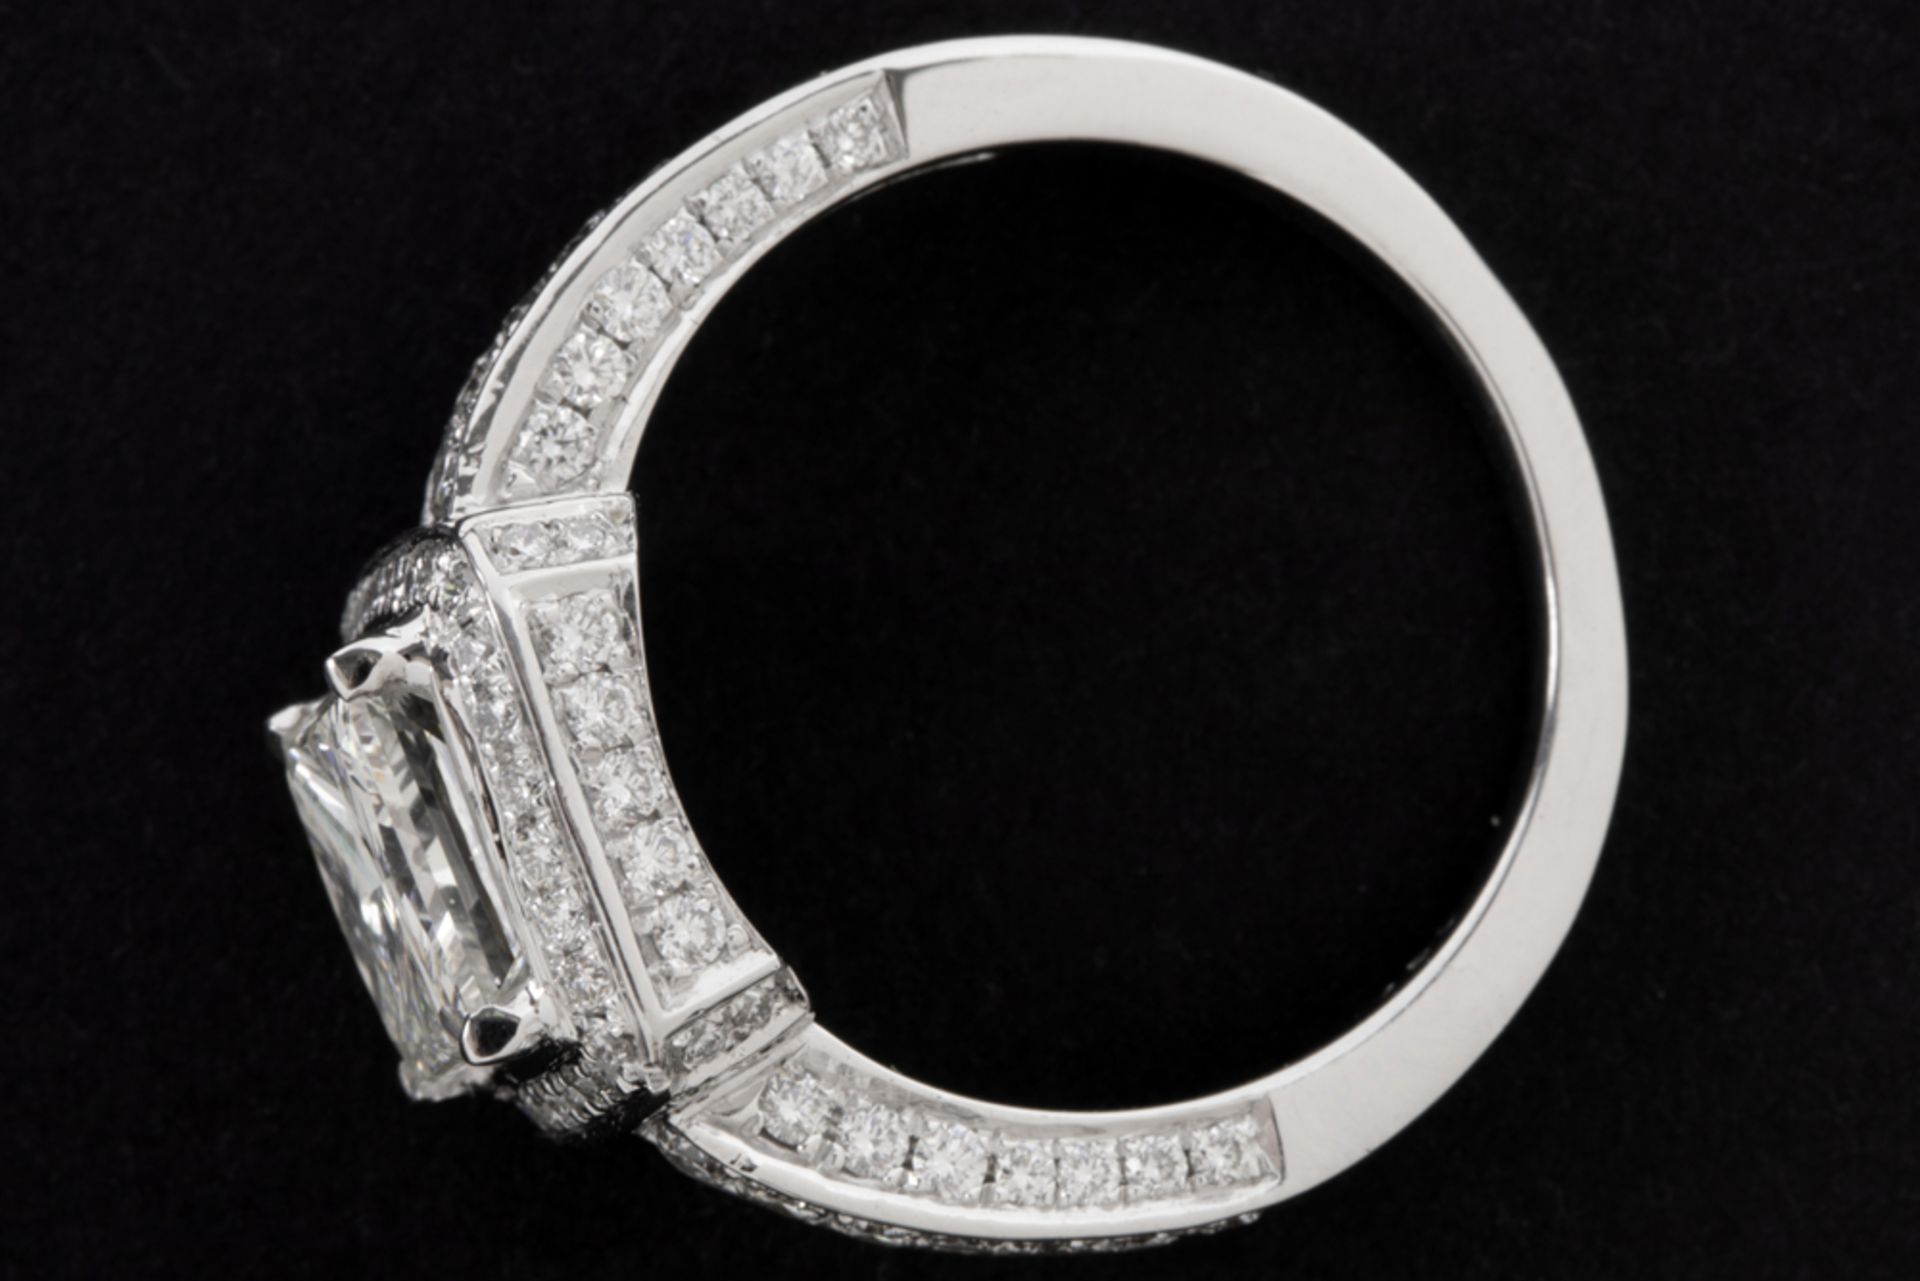 classy ring in white gold (18 carat) with a central 2,03 carat high quality princess' cut diamond - Bild 2 aus 3